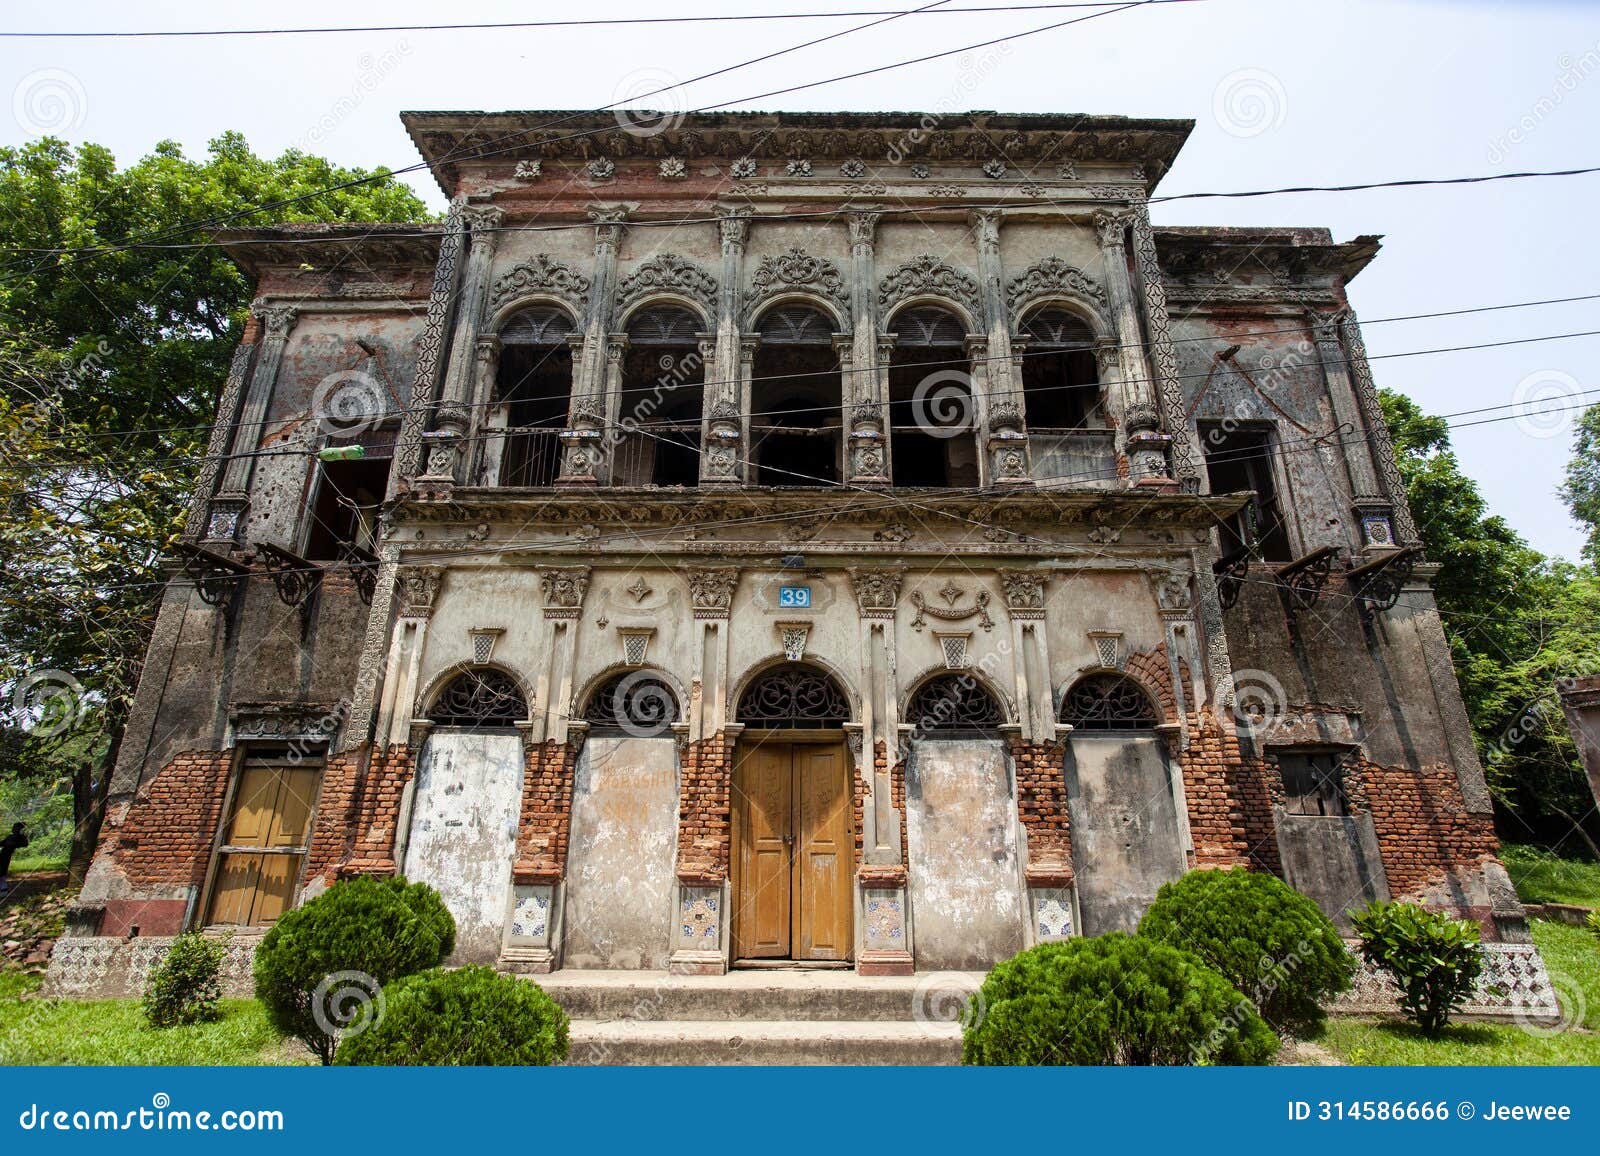 old ruined houses in the deserted city panam nagar (panam city) in bangladesh